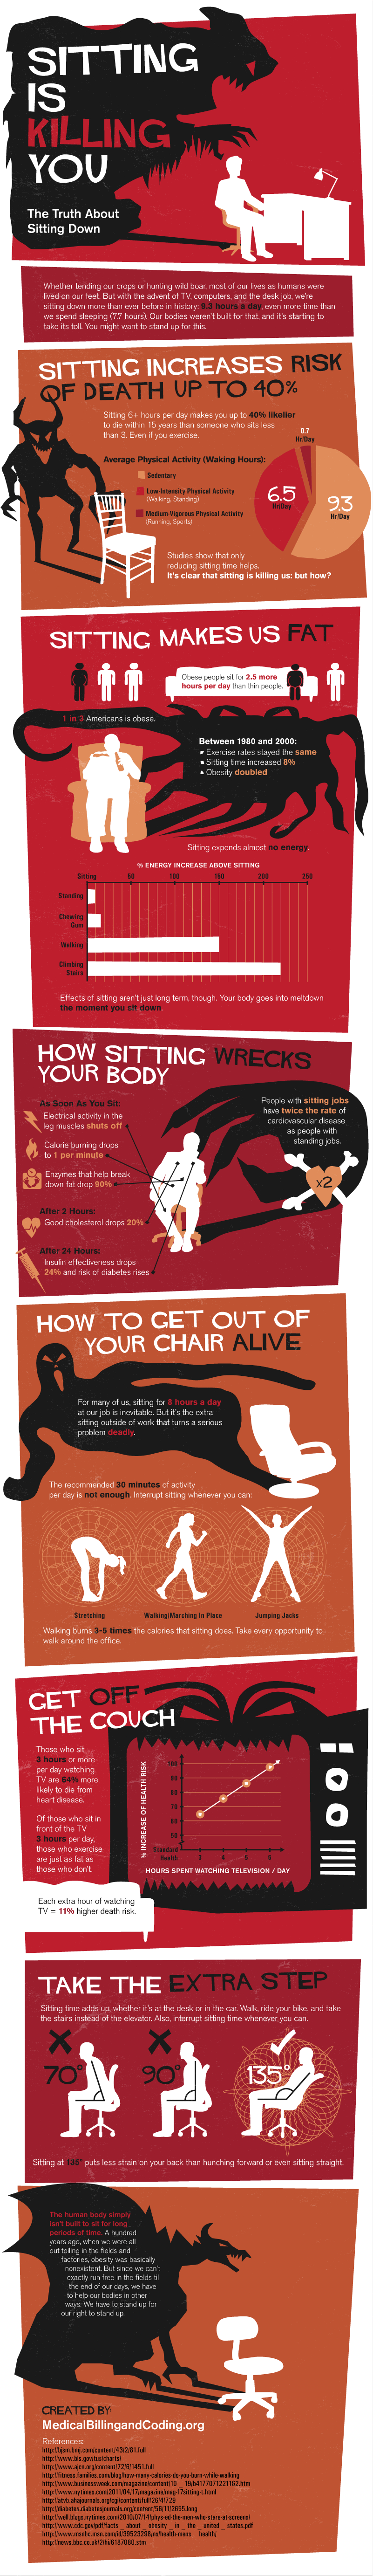 Sitting Down Is Killing You